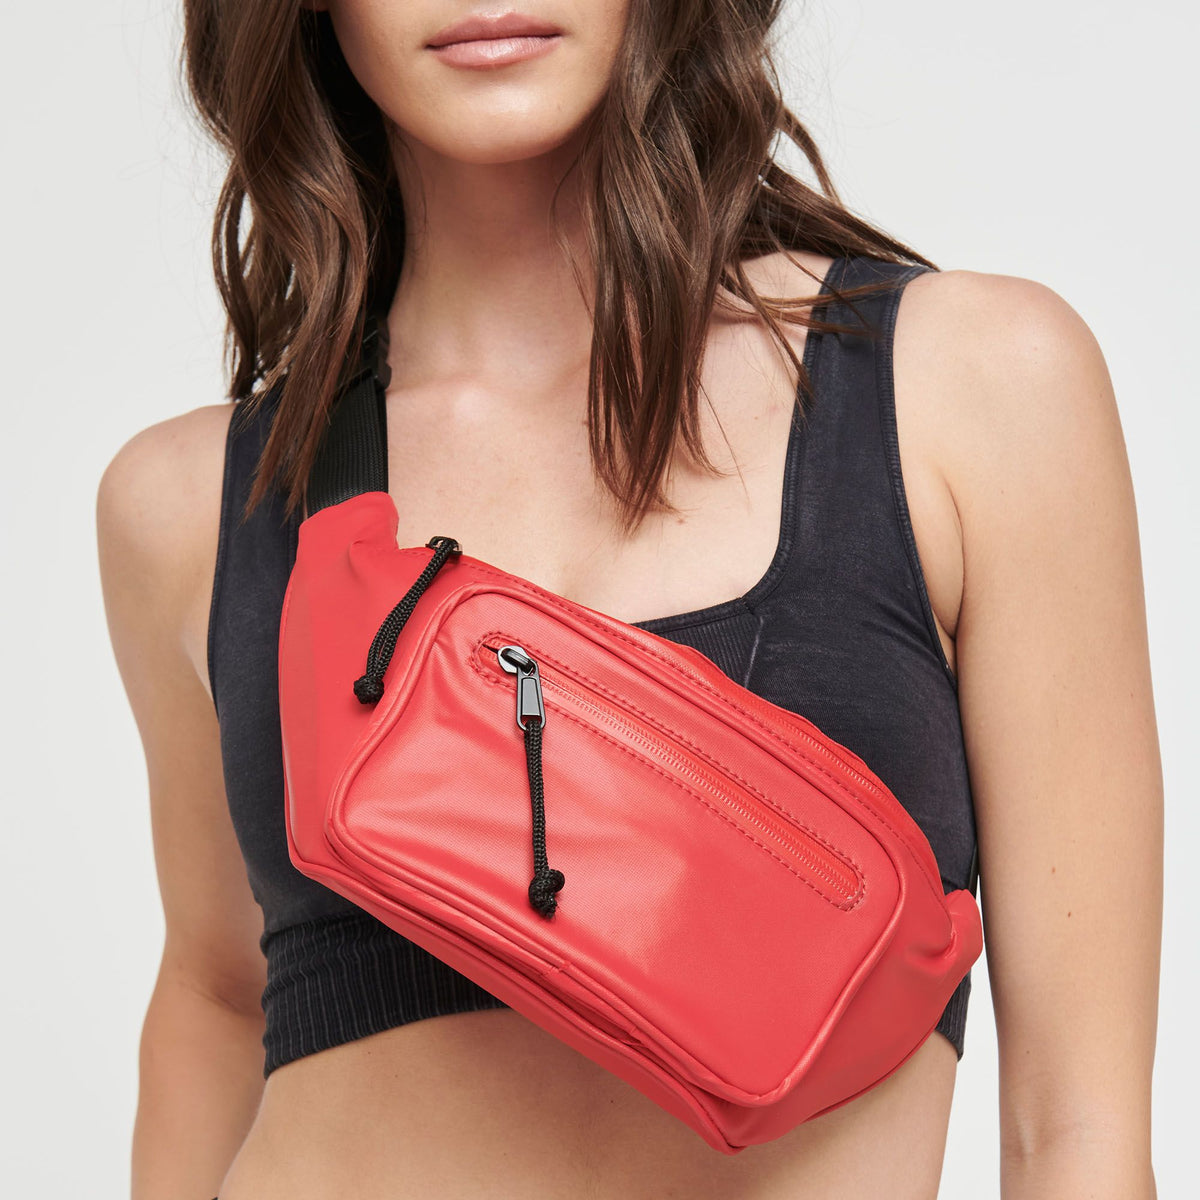 Woman wearing Bright Red Sol and Selene Hands Down Belt Bag 841764104234 View 1 | Bright Red